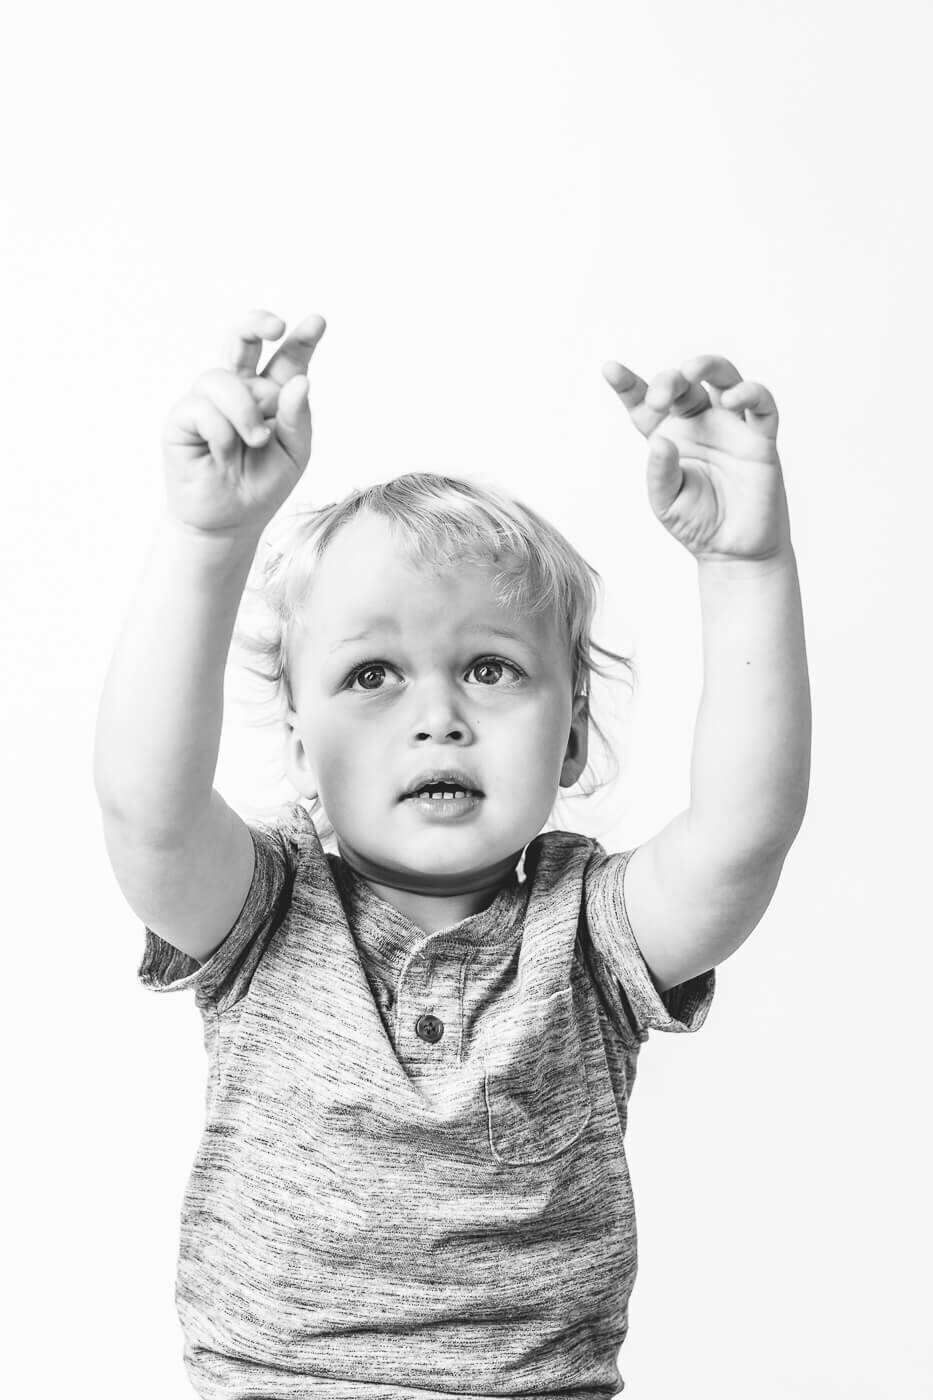 Boy reaching up to grab an imaginary object